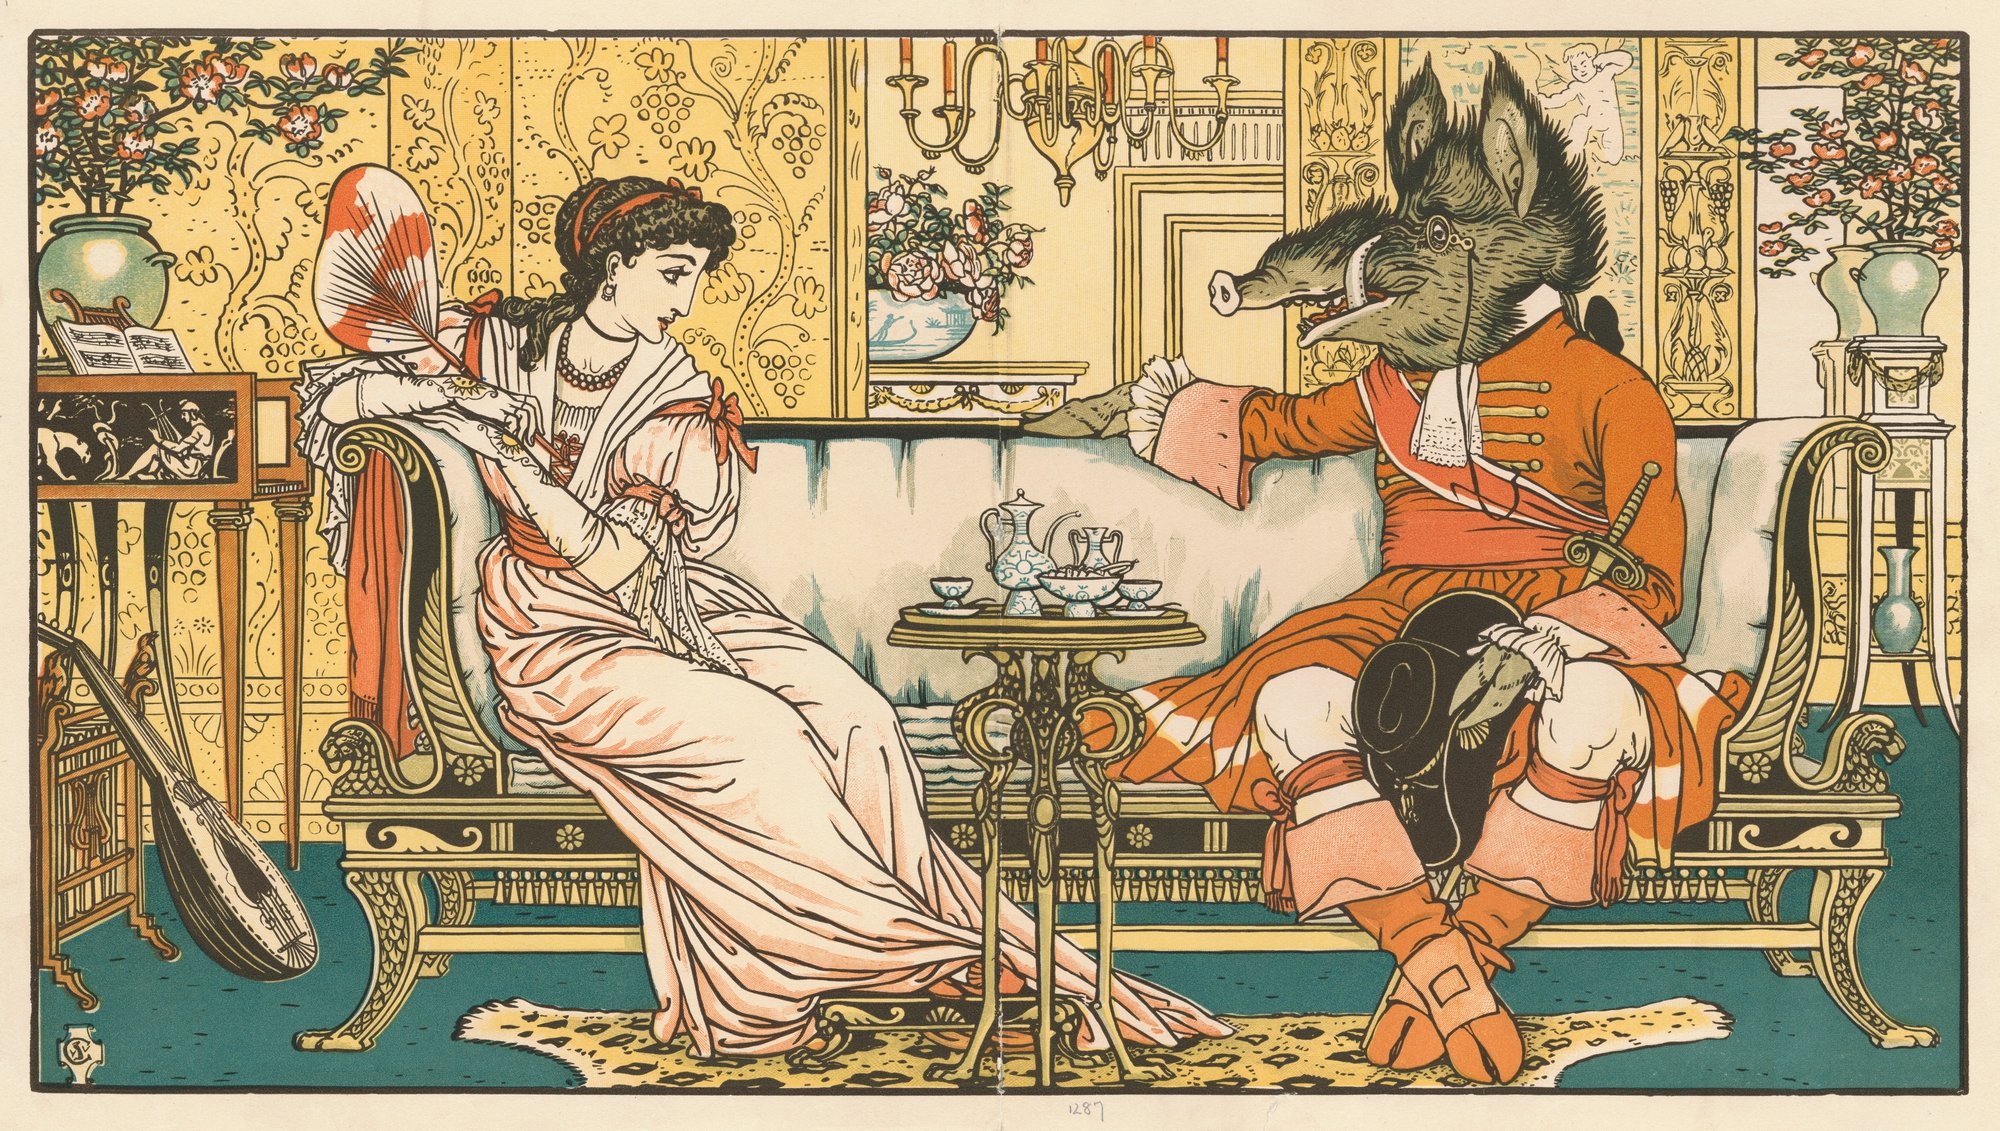 Beauty and the Beast (1896)